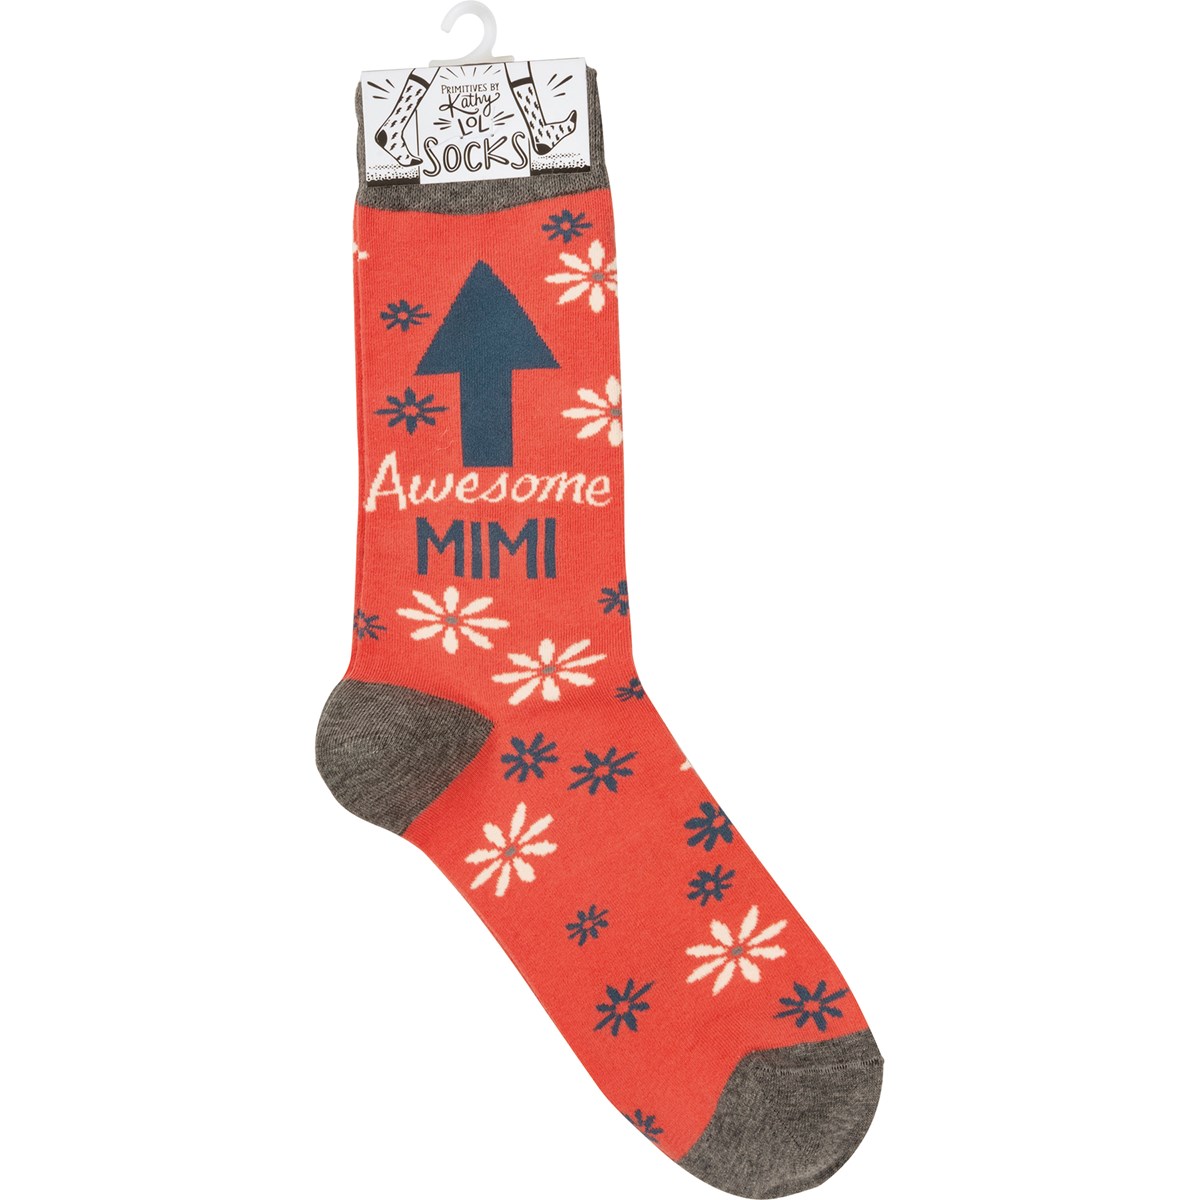 Socks - Awesome Mimi - One Size Fits Most - Cotton, Nylon, Spandex